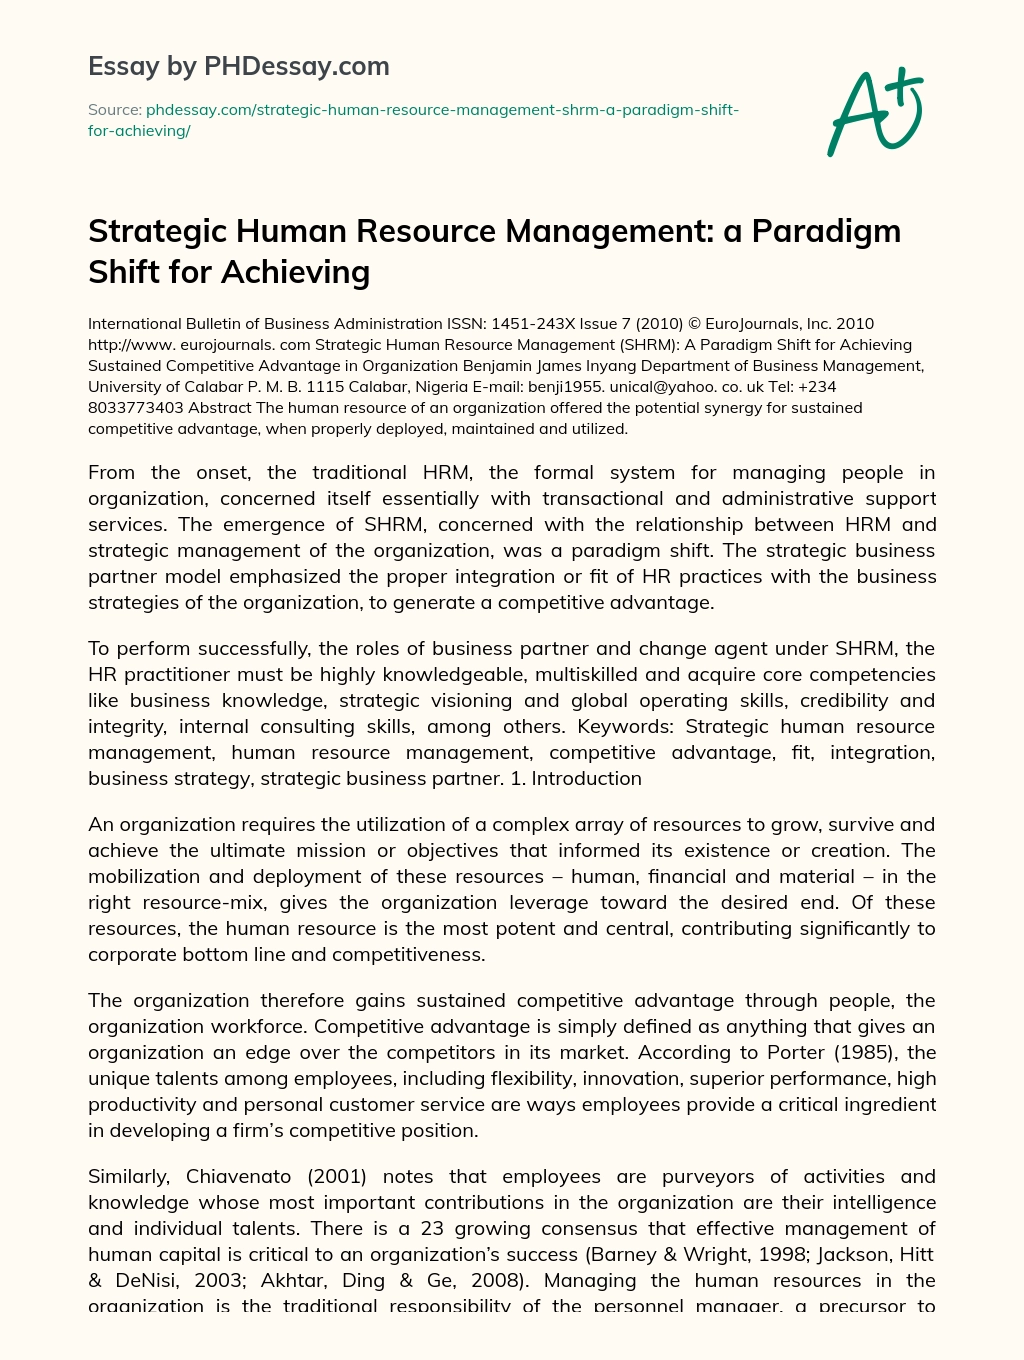 Strategic Human Resource Management: a Paradigm Shift for Achieving essay